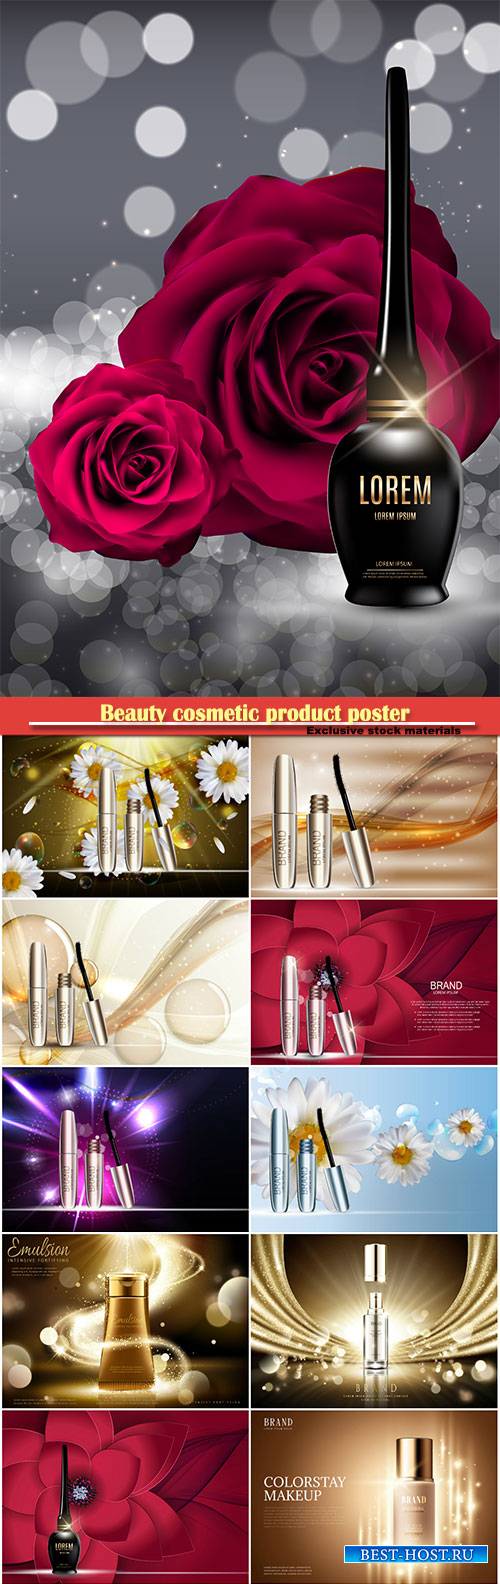 Beauty cosmetic product poster, fashion design makeup cosmetics, background ...